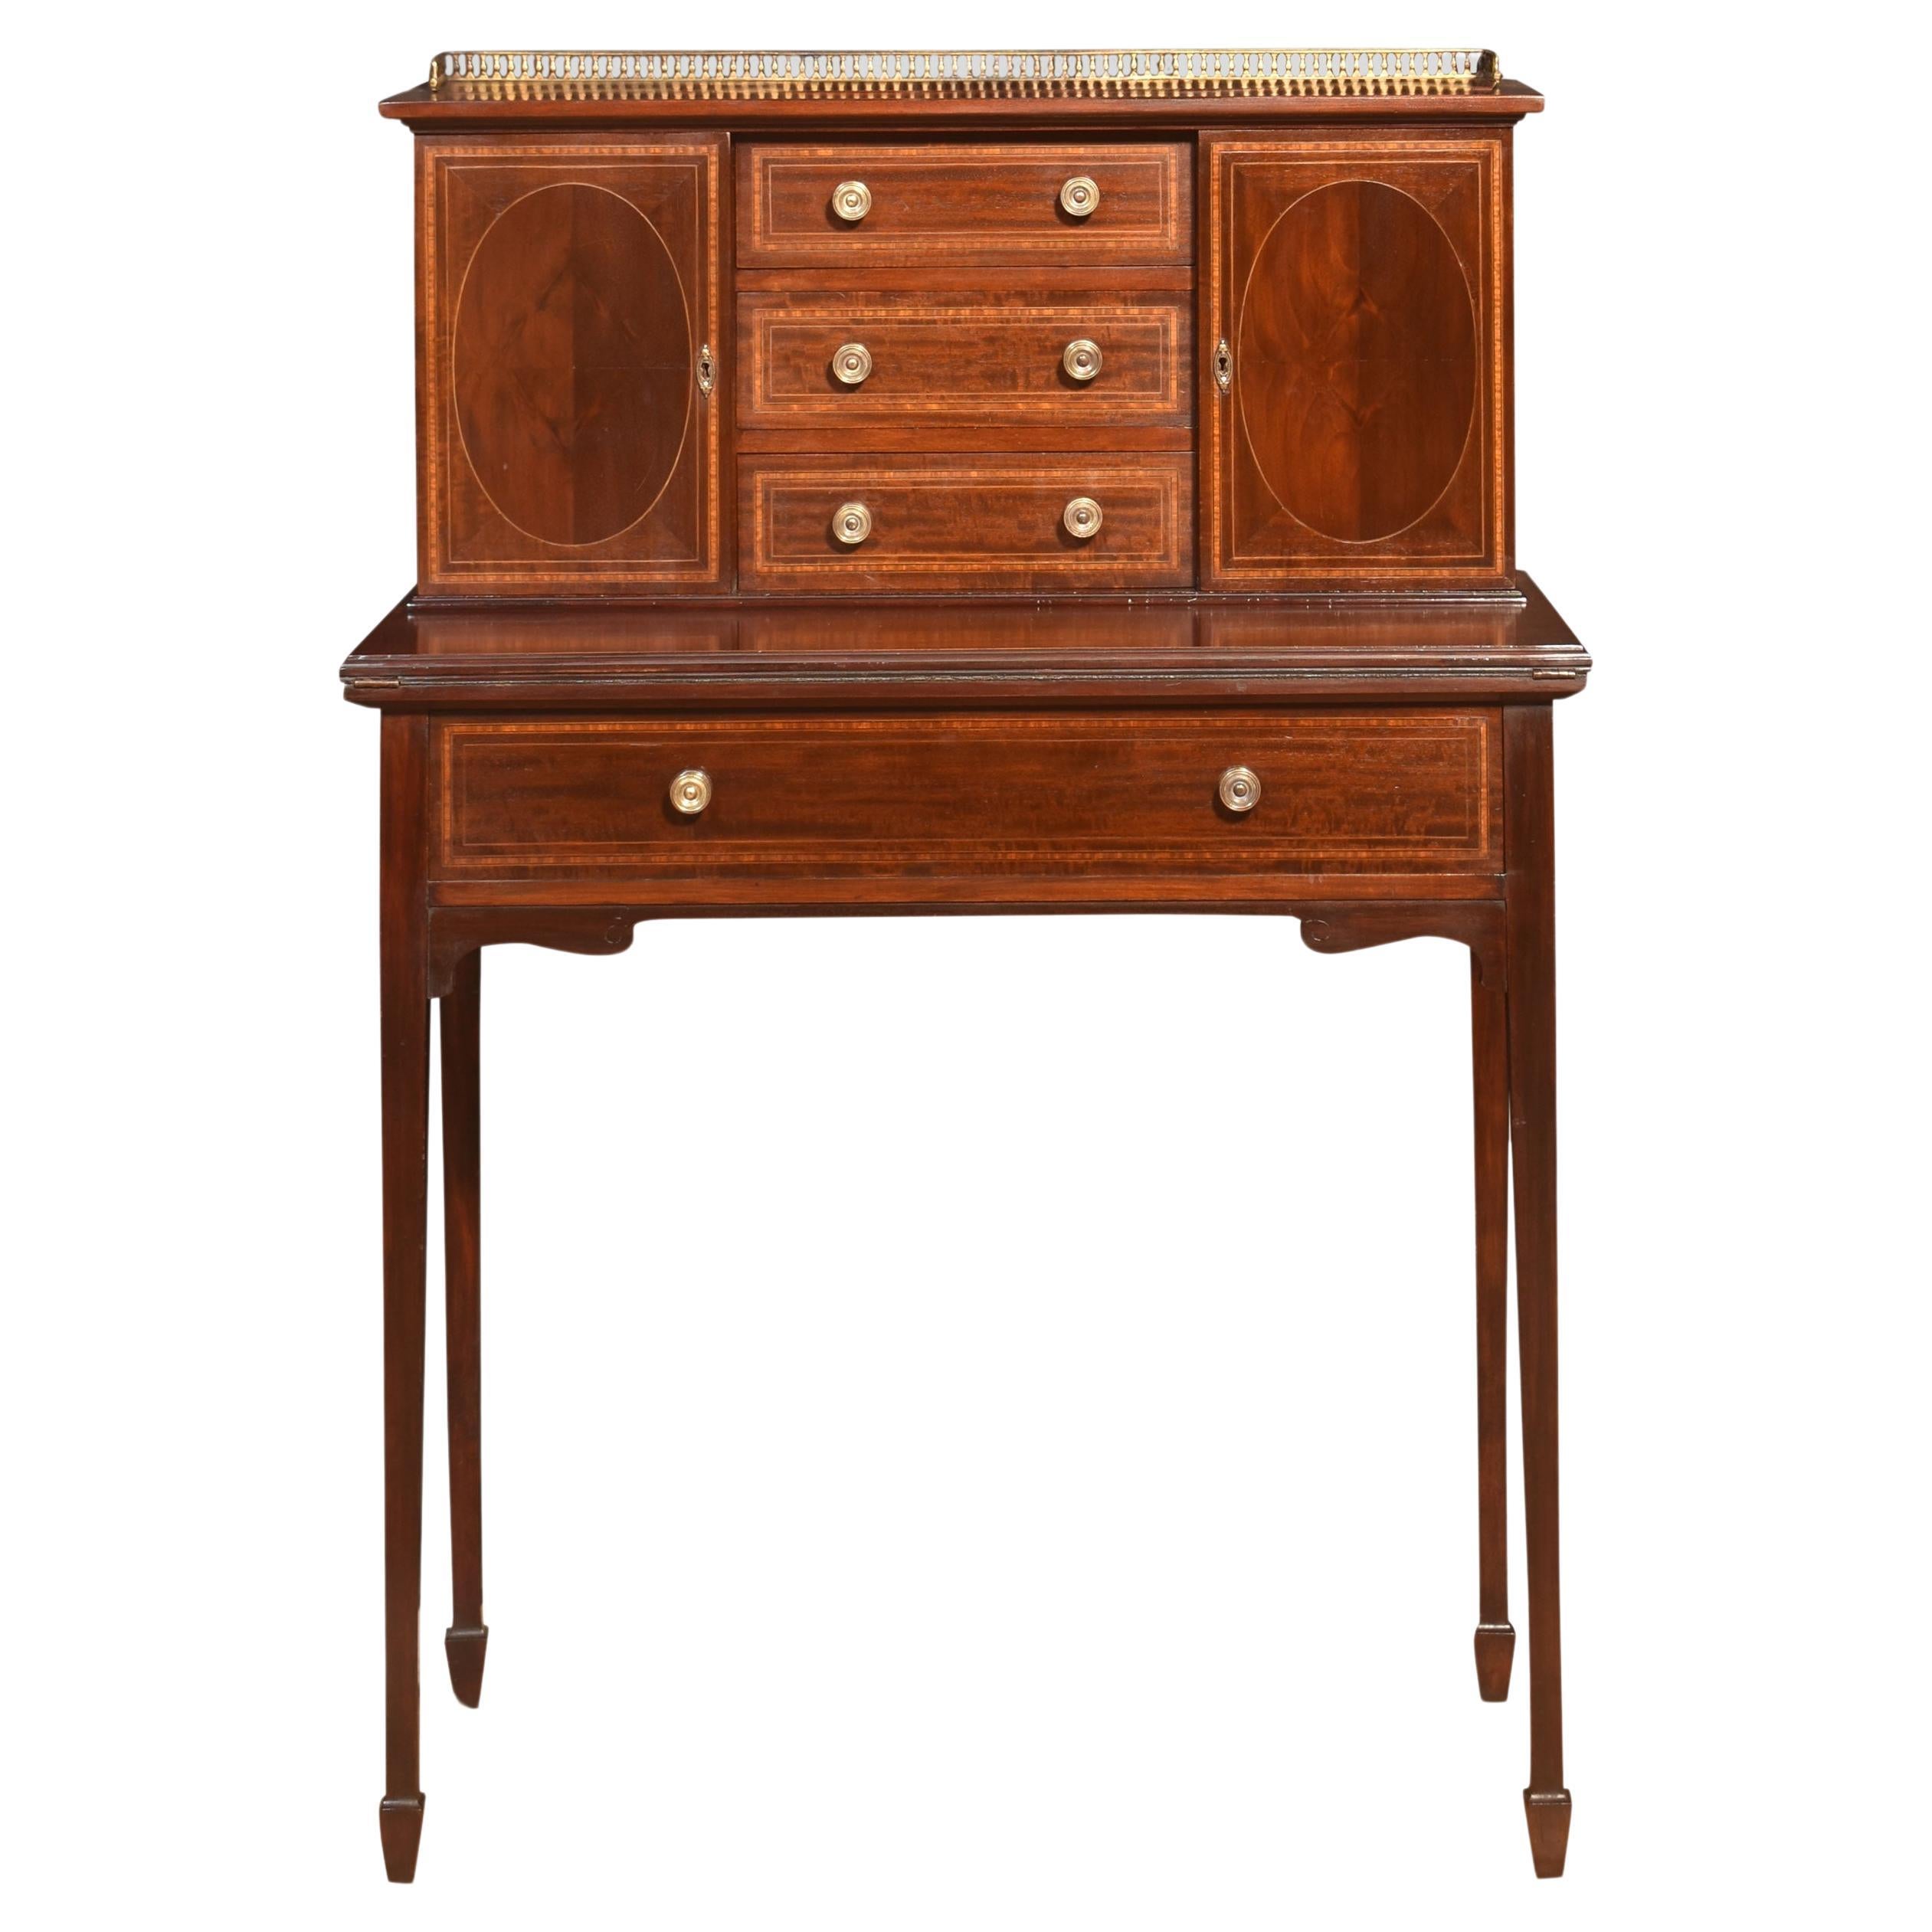 Mahogany lady’s writing desk For Sale